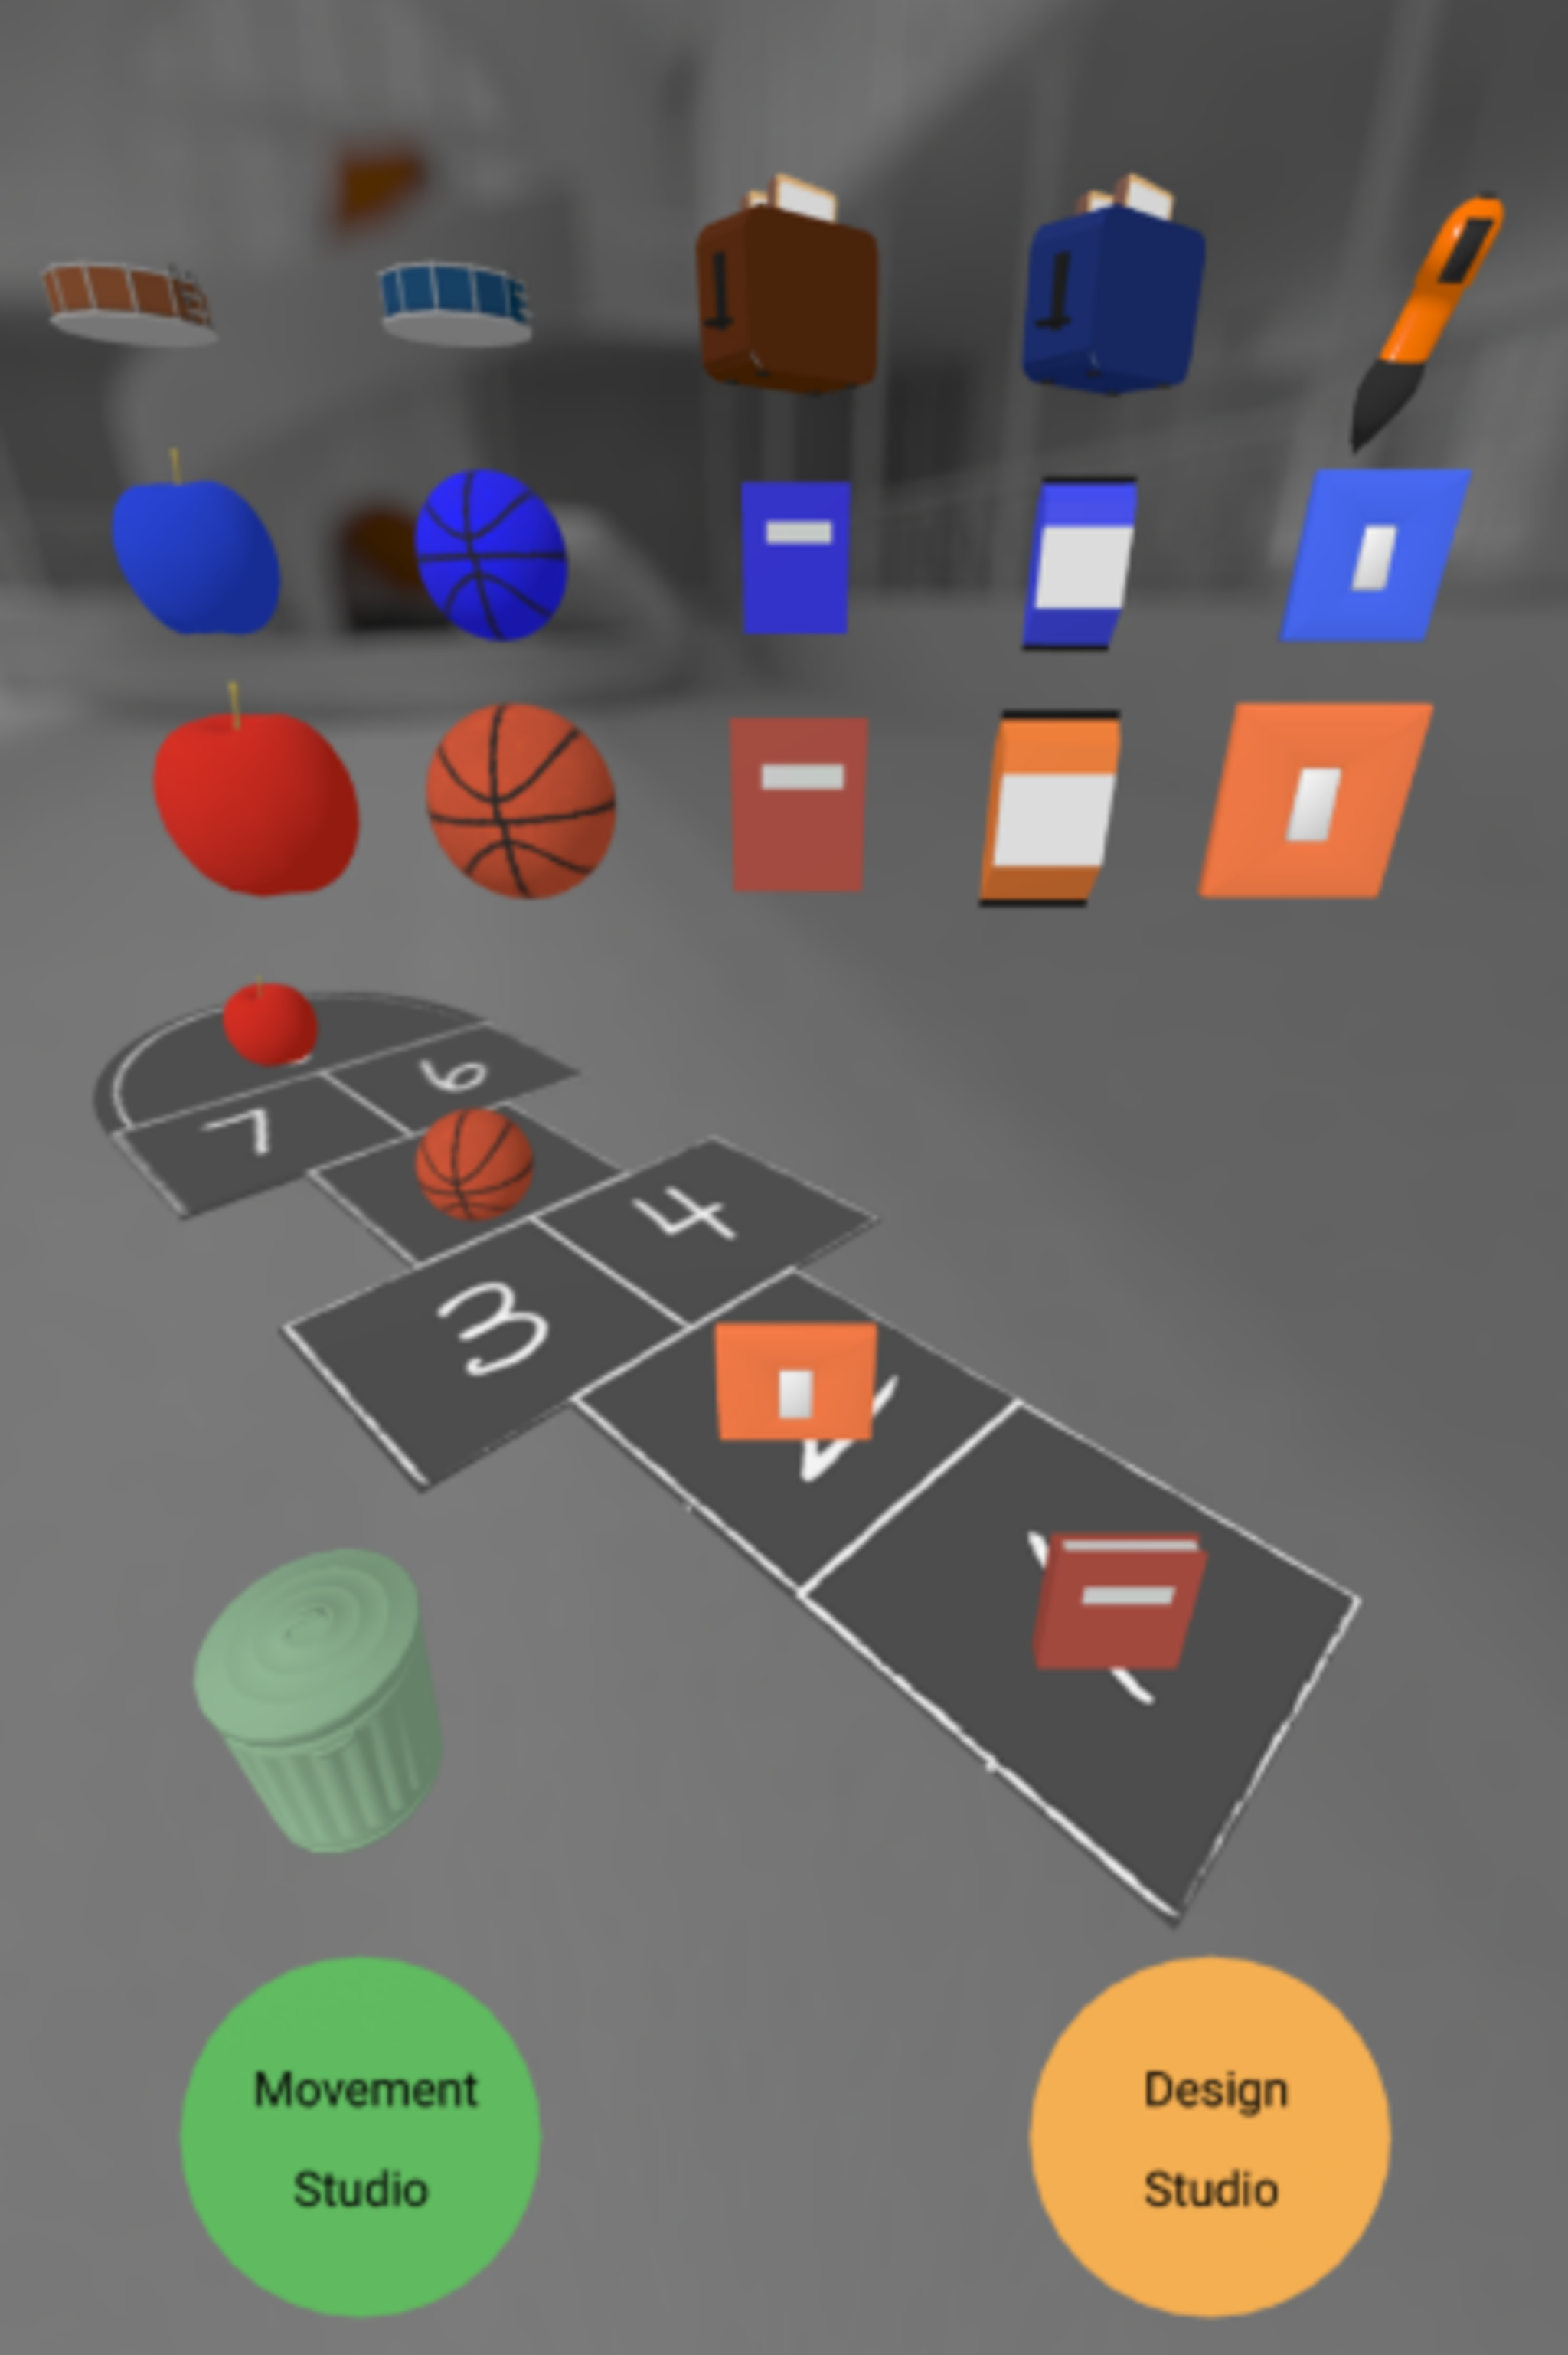 3D renderings of hopscotch, apples, basketballs, toasters, books, backpacks, a pen and a bin. Text: movement studio; design studio